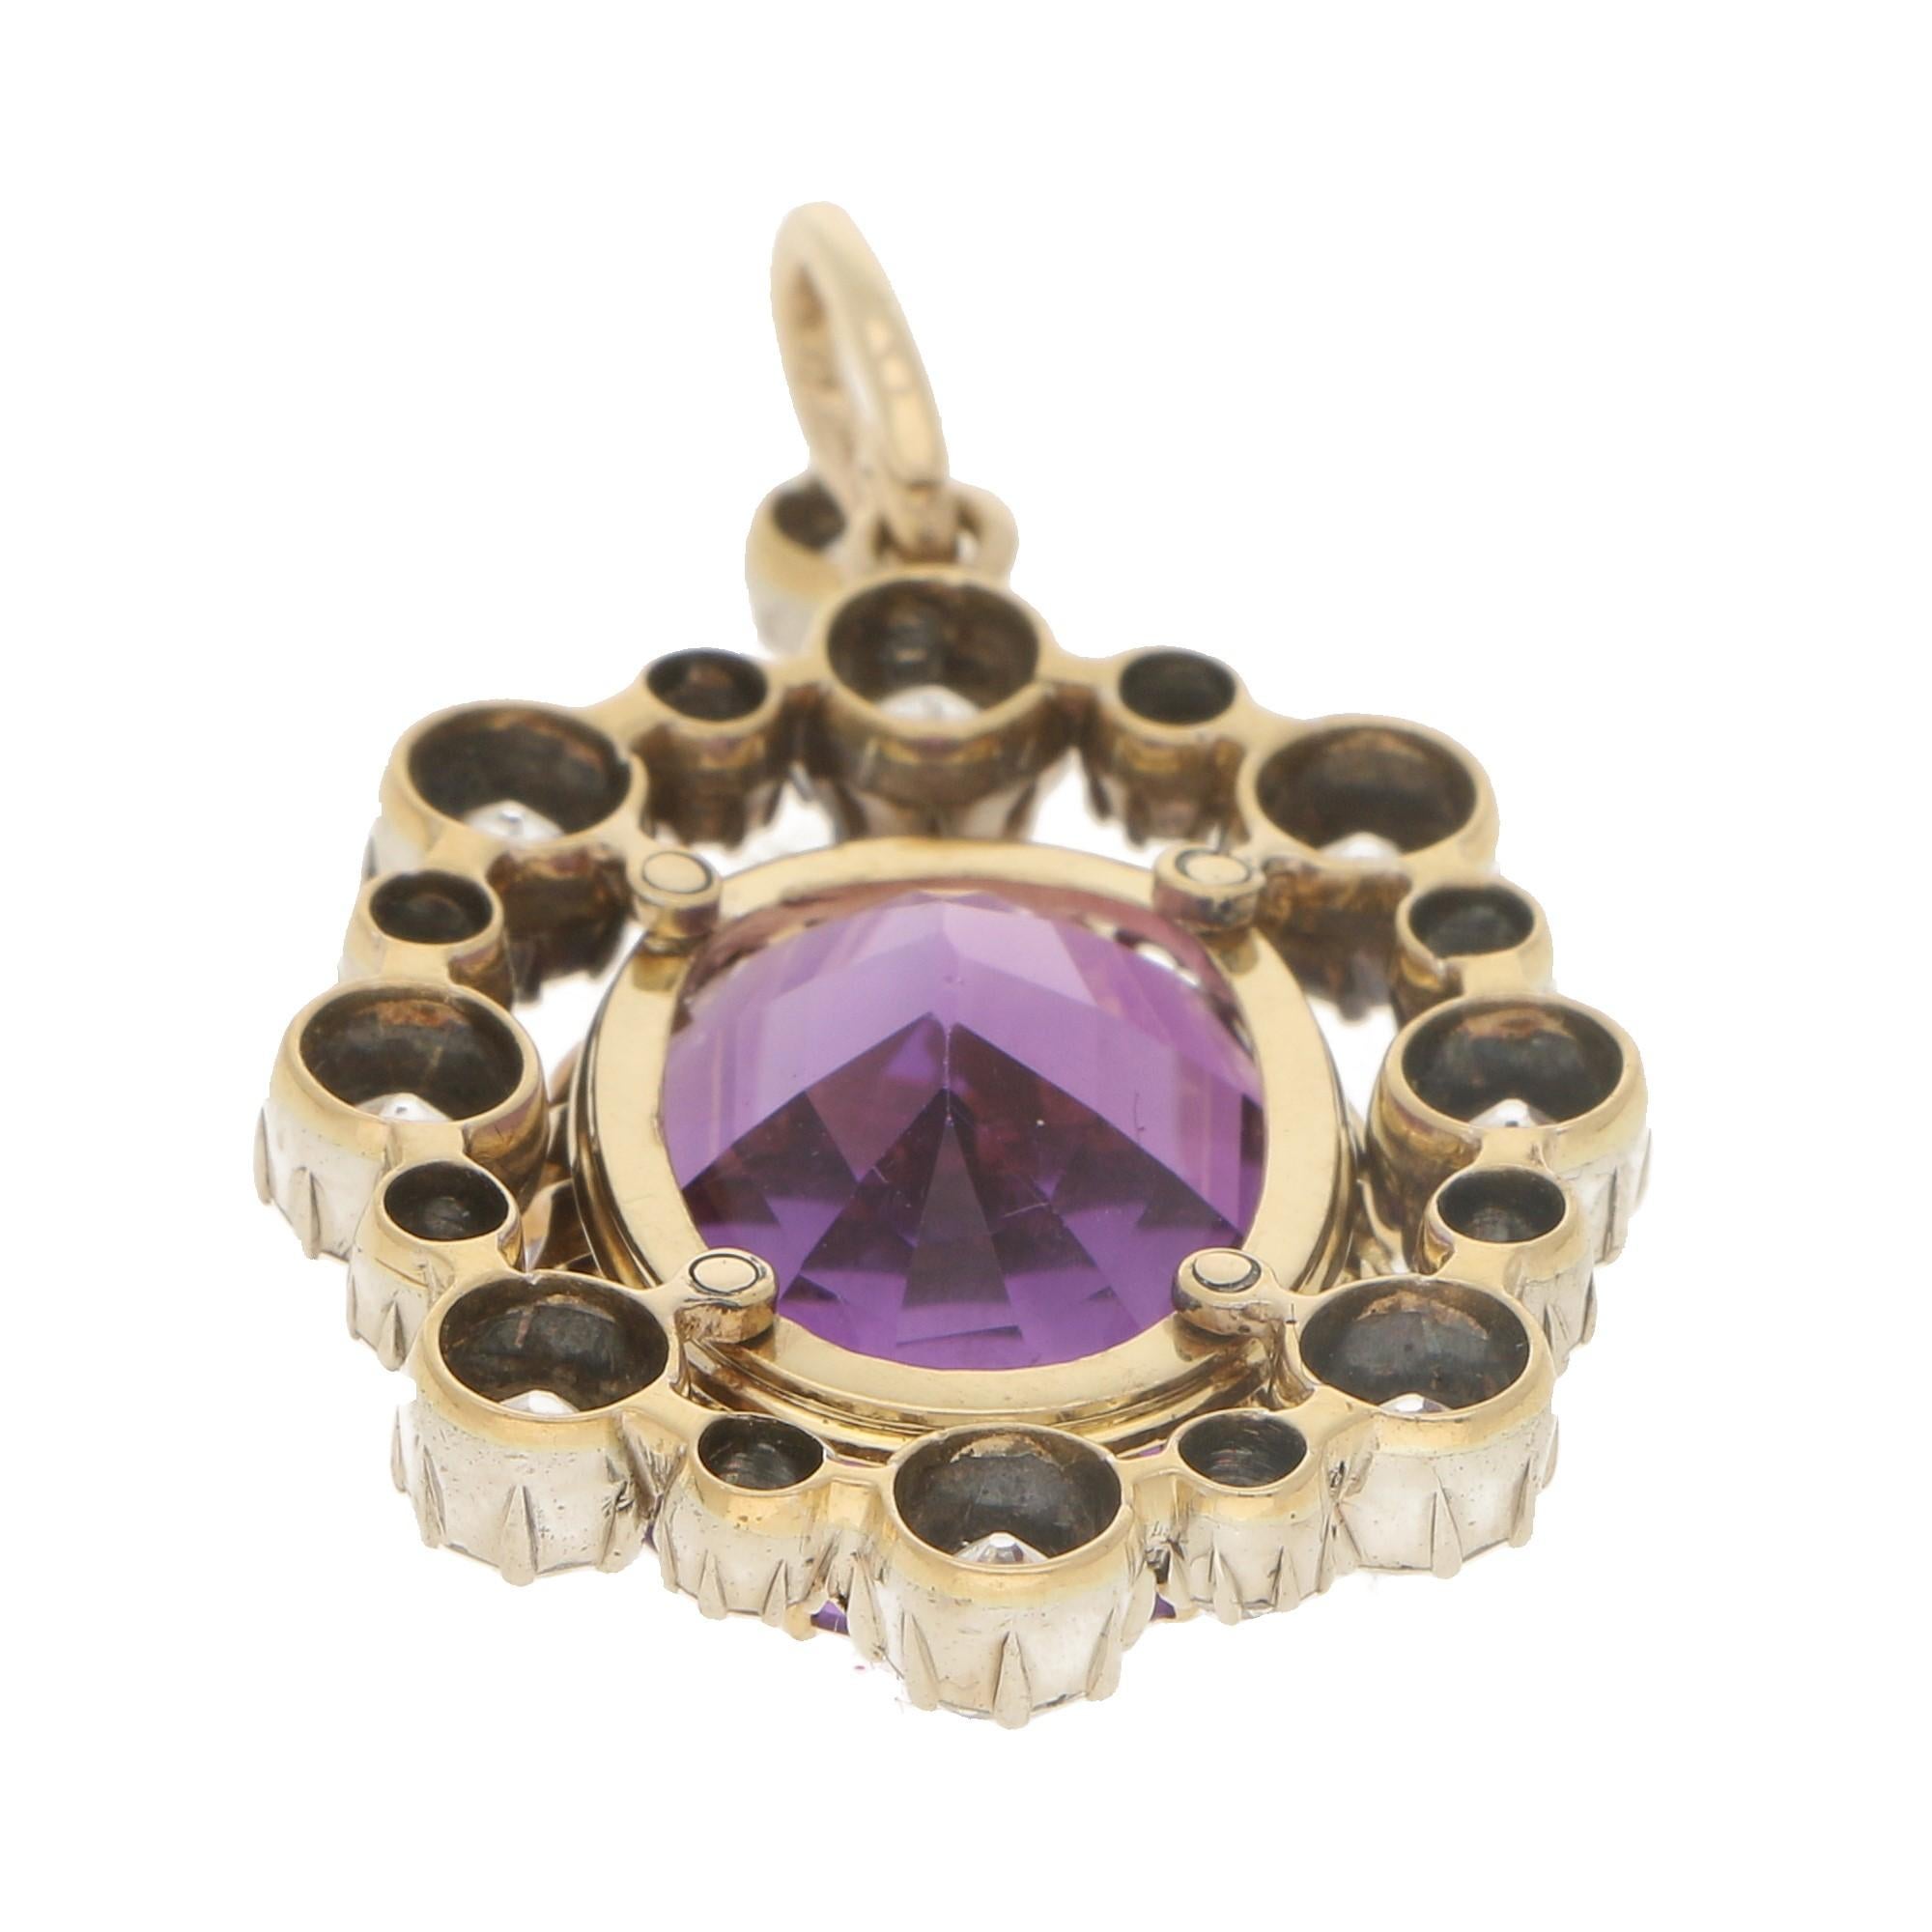 Oval Cut Victorian Amethyst and Diamond Pendant in Silver on Gold